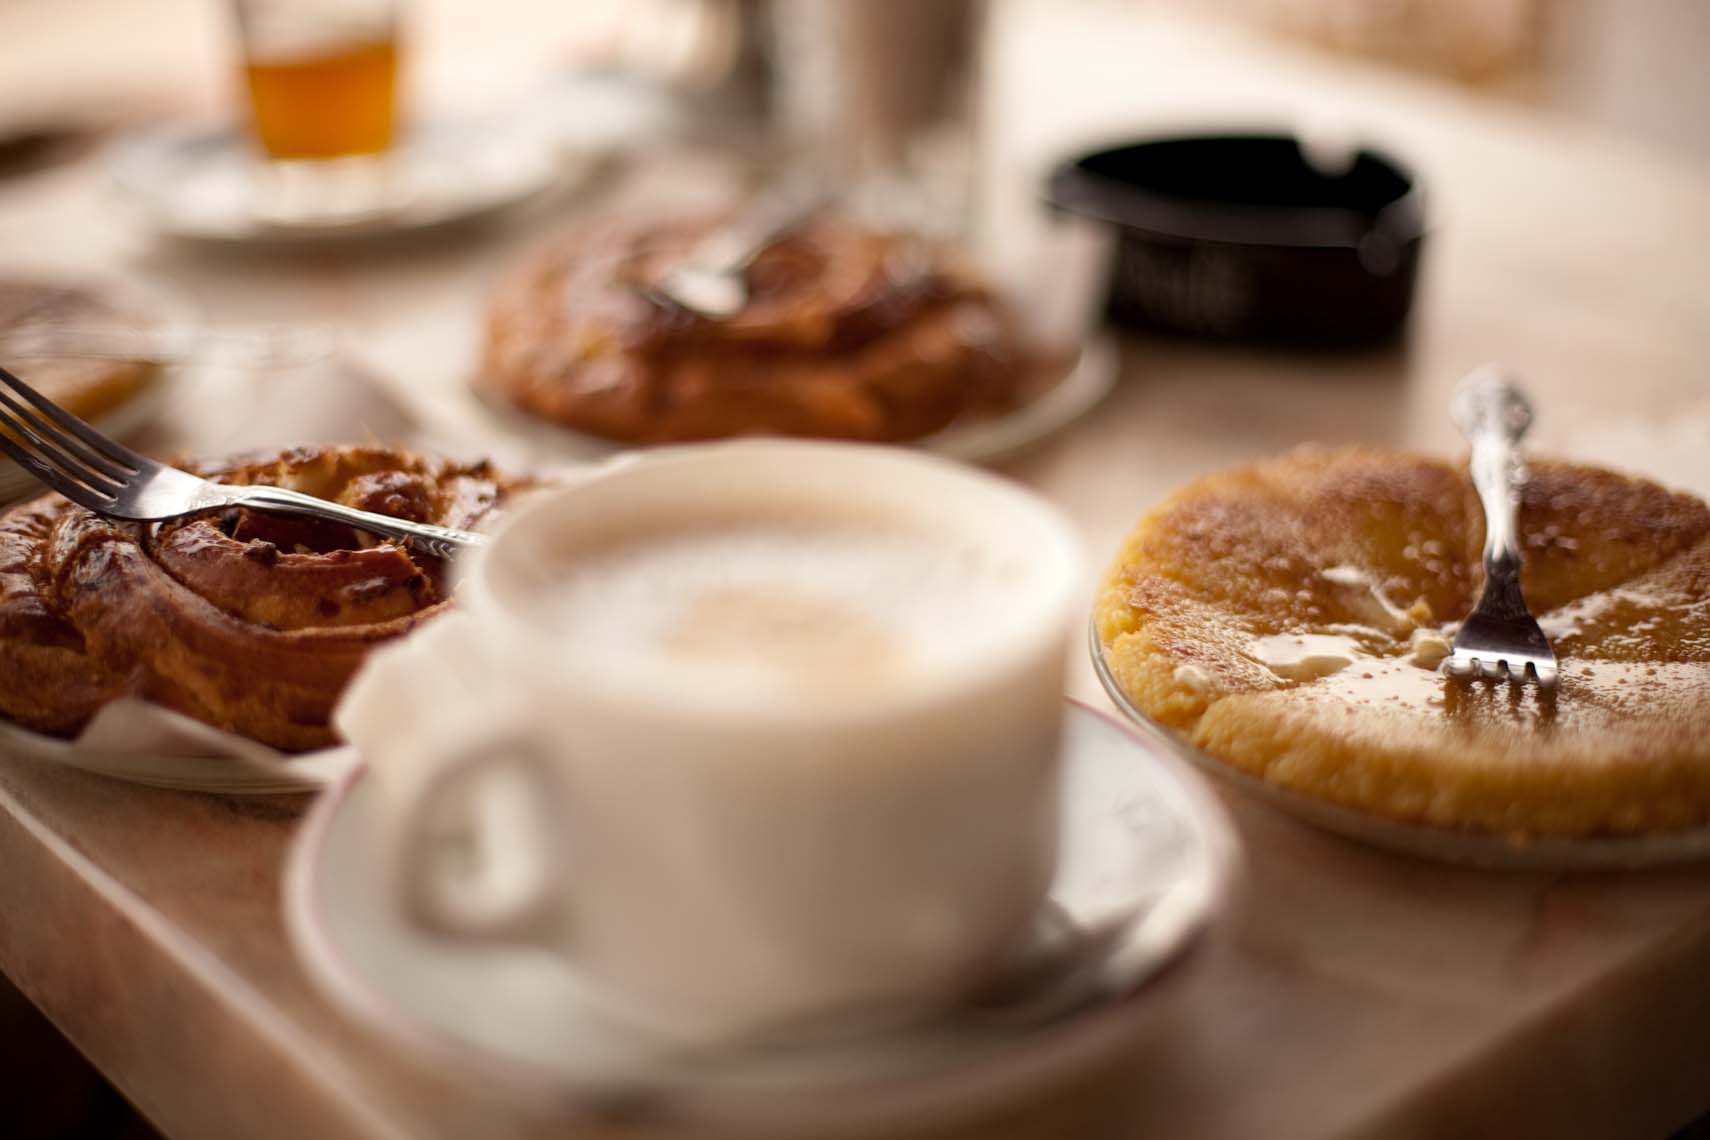 Coffee and Pastries